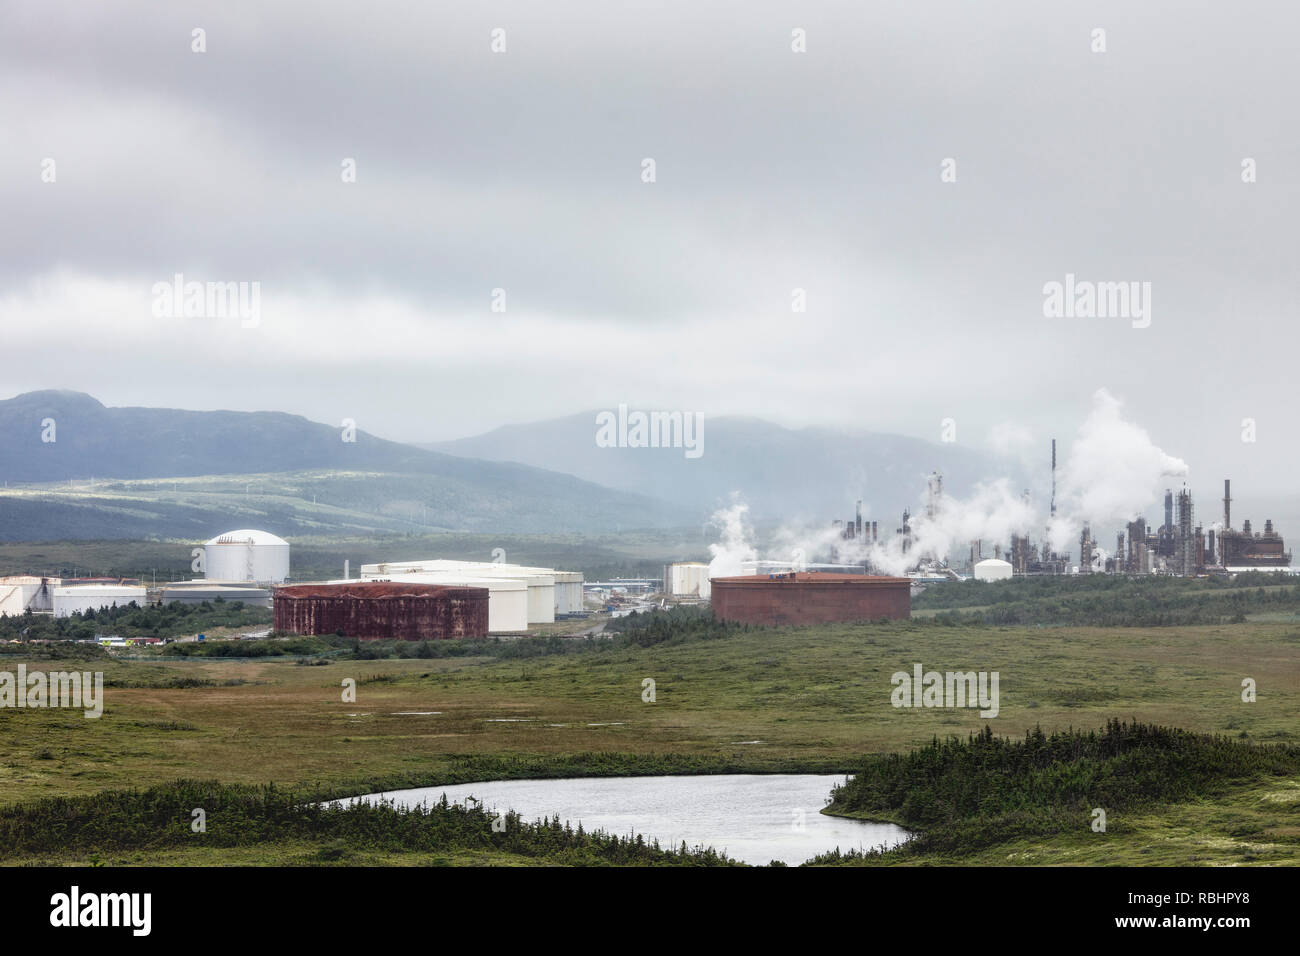 COME BY CHANCE / ARNOLD'S COVE, NEWFOUNDLAND, CANADA - August 17, 2018: The North Atlantic oil refinery outside the towns of Come By Chance and Arnold Stock Photo